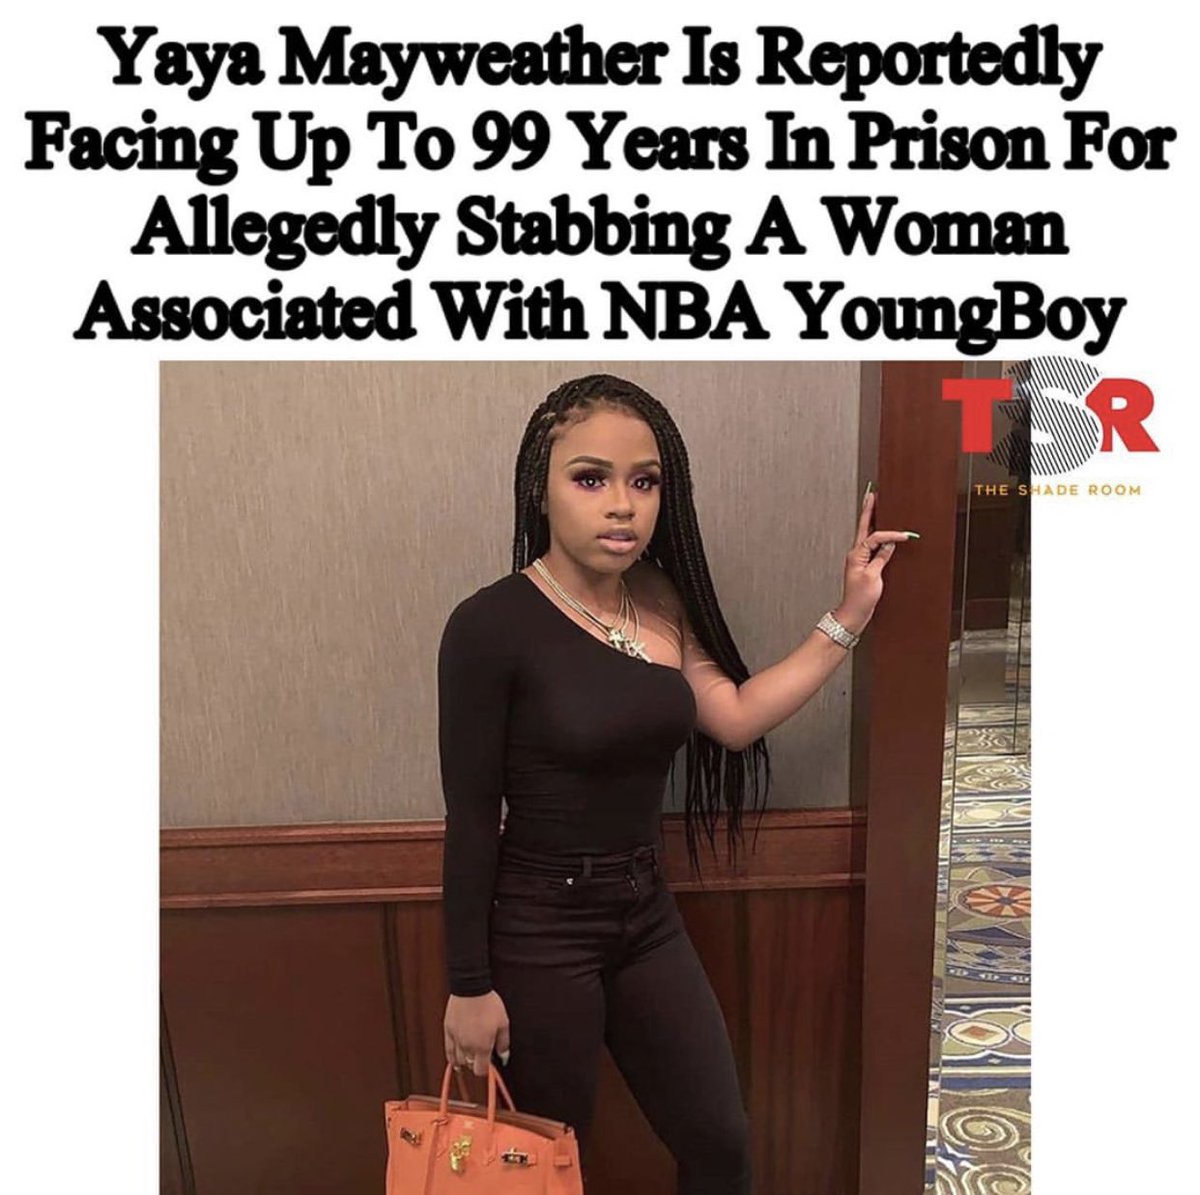 Yaya Mayweather facing up to 99 years all because of a man uno. She stabbed NBA Youngboys pregnant baby’s mum in her arms and the stomach & the baby died. Fam. What in the fuck